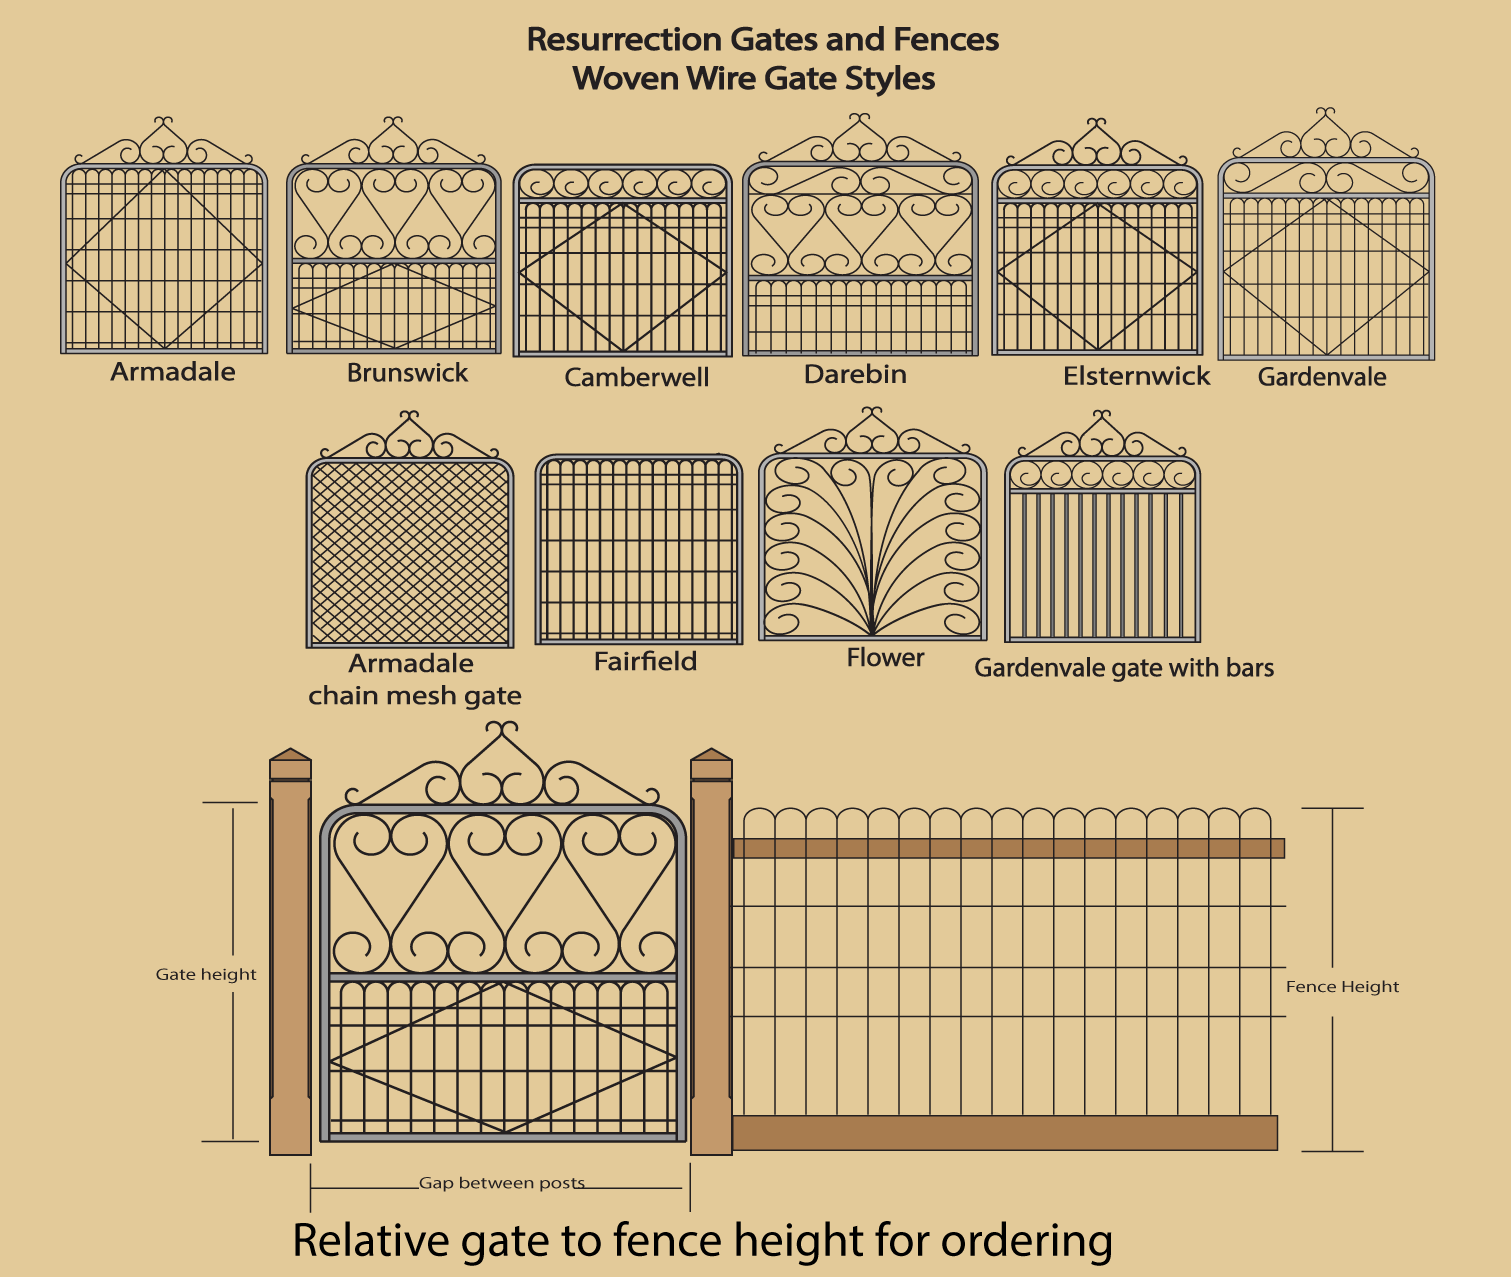 Woven Wire Gate styles and rule